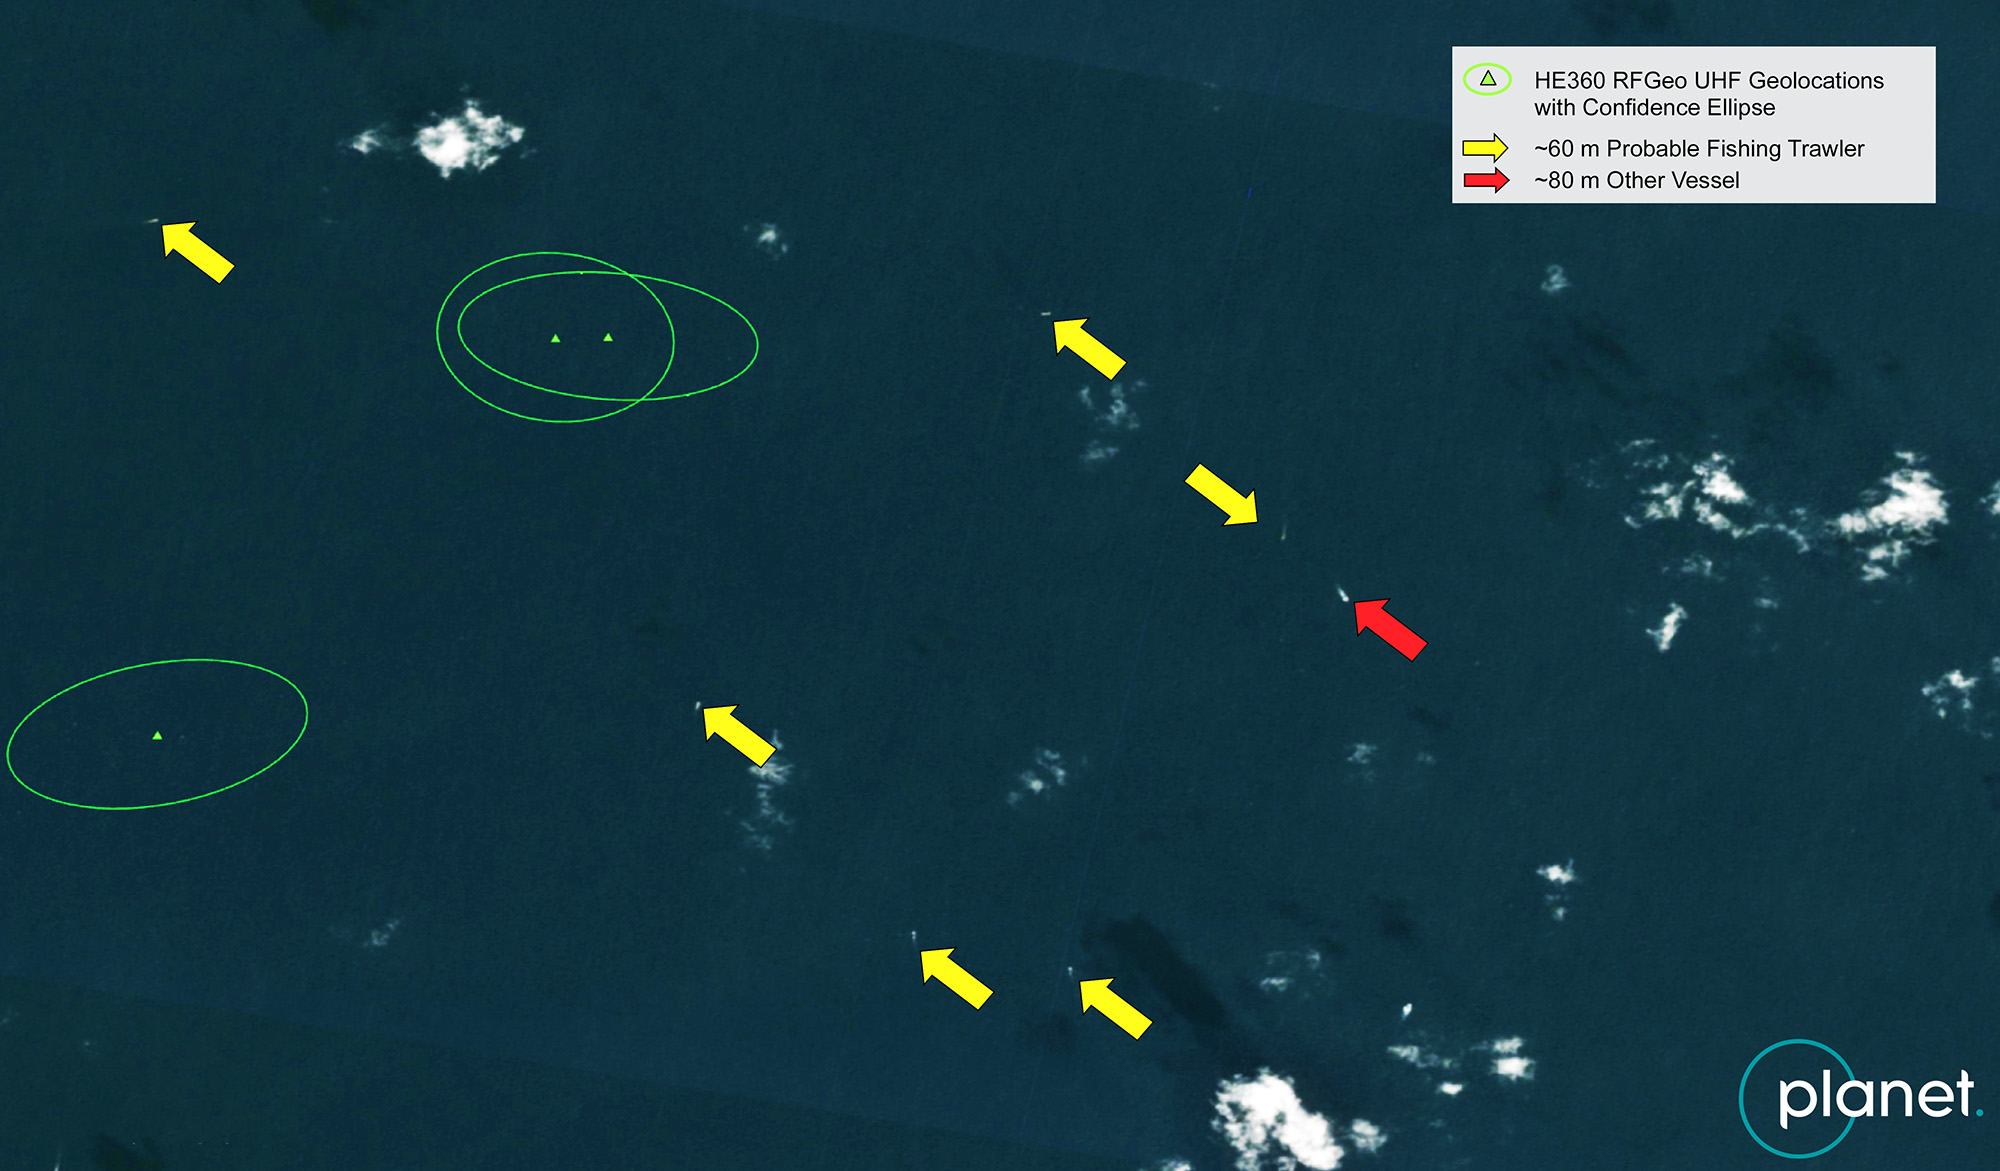 This PlanetScope imagery captured the Site B dark vessels around the same time as the HawkEye 360 UHF signal data, supporting analysis showing UHF communication signals are being used by trawler-type fishing vessels highlighted in the image. (Note vessels have likely shifted positions between time from RF capture to image capture.)